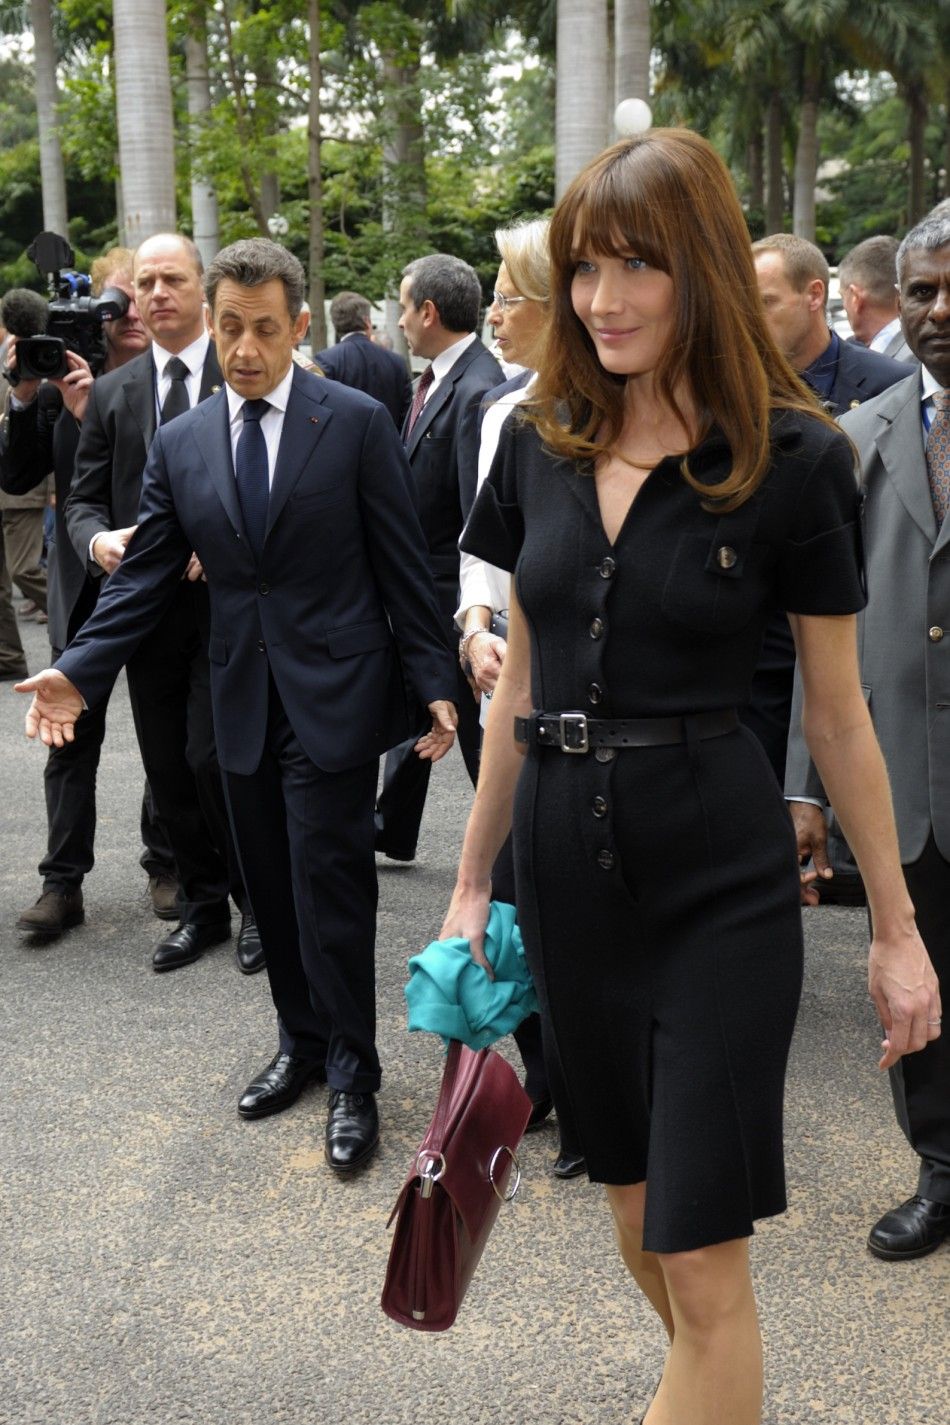 France039s President Sarkozy and First Lady Carla Bruni-Sarkozy leave a meeting at the ISRO satellite center in Bangalore